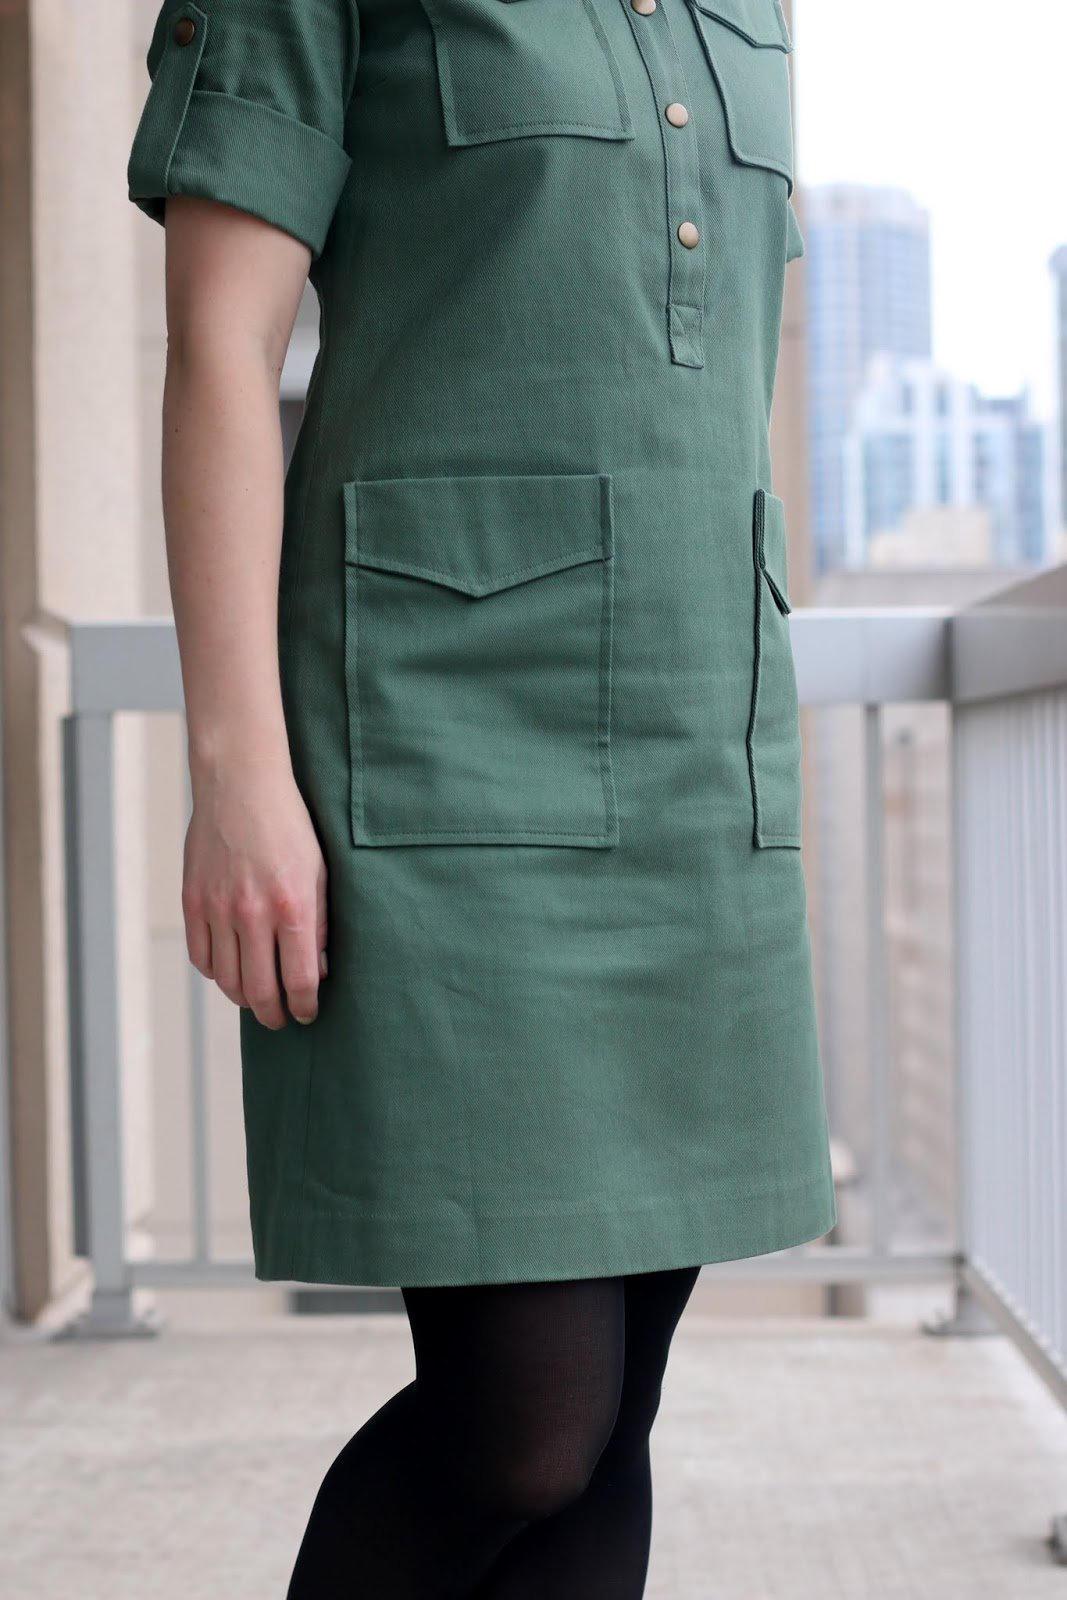 Thrifted Emerson Fry green dress with tights and cognac boots | Made in the USA | wear to work outfit, office style, business casual to brunch